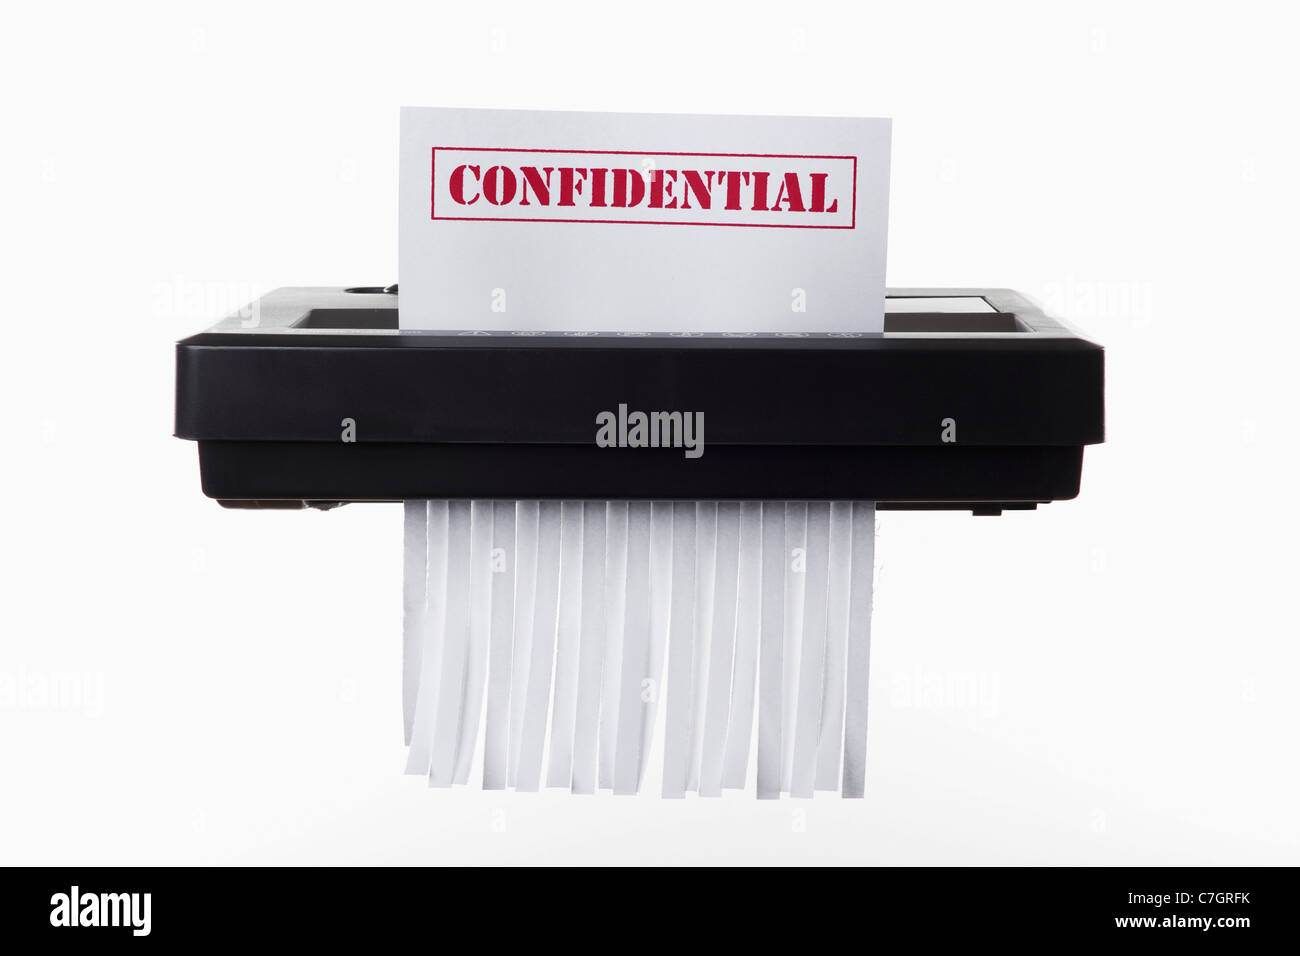 A document with CONFIDENTIAL on it being shredded in a paper shredder Stock Photo